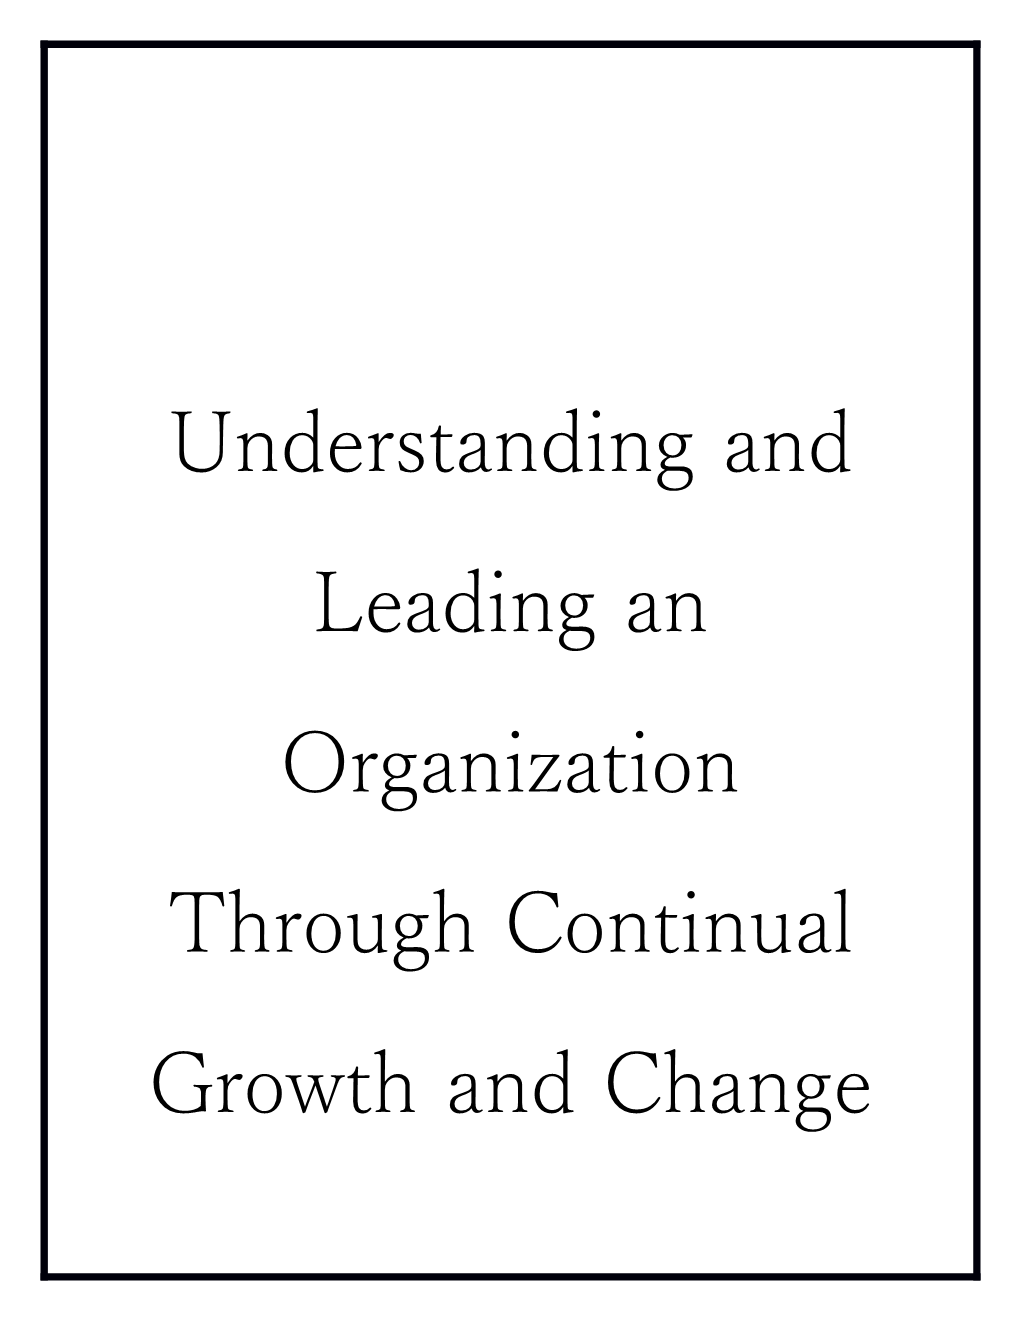 Understanding and Leading an Organization Through Continual Growth and Change